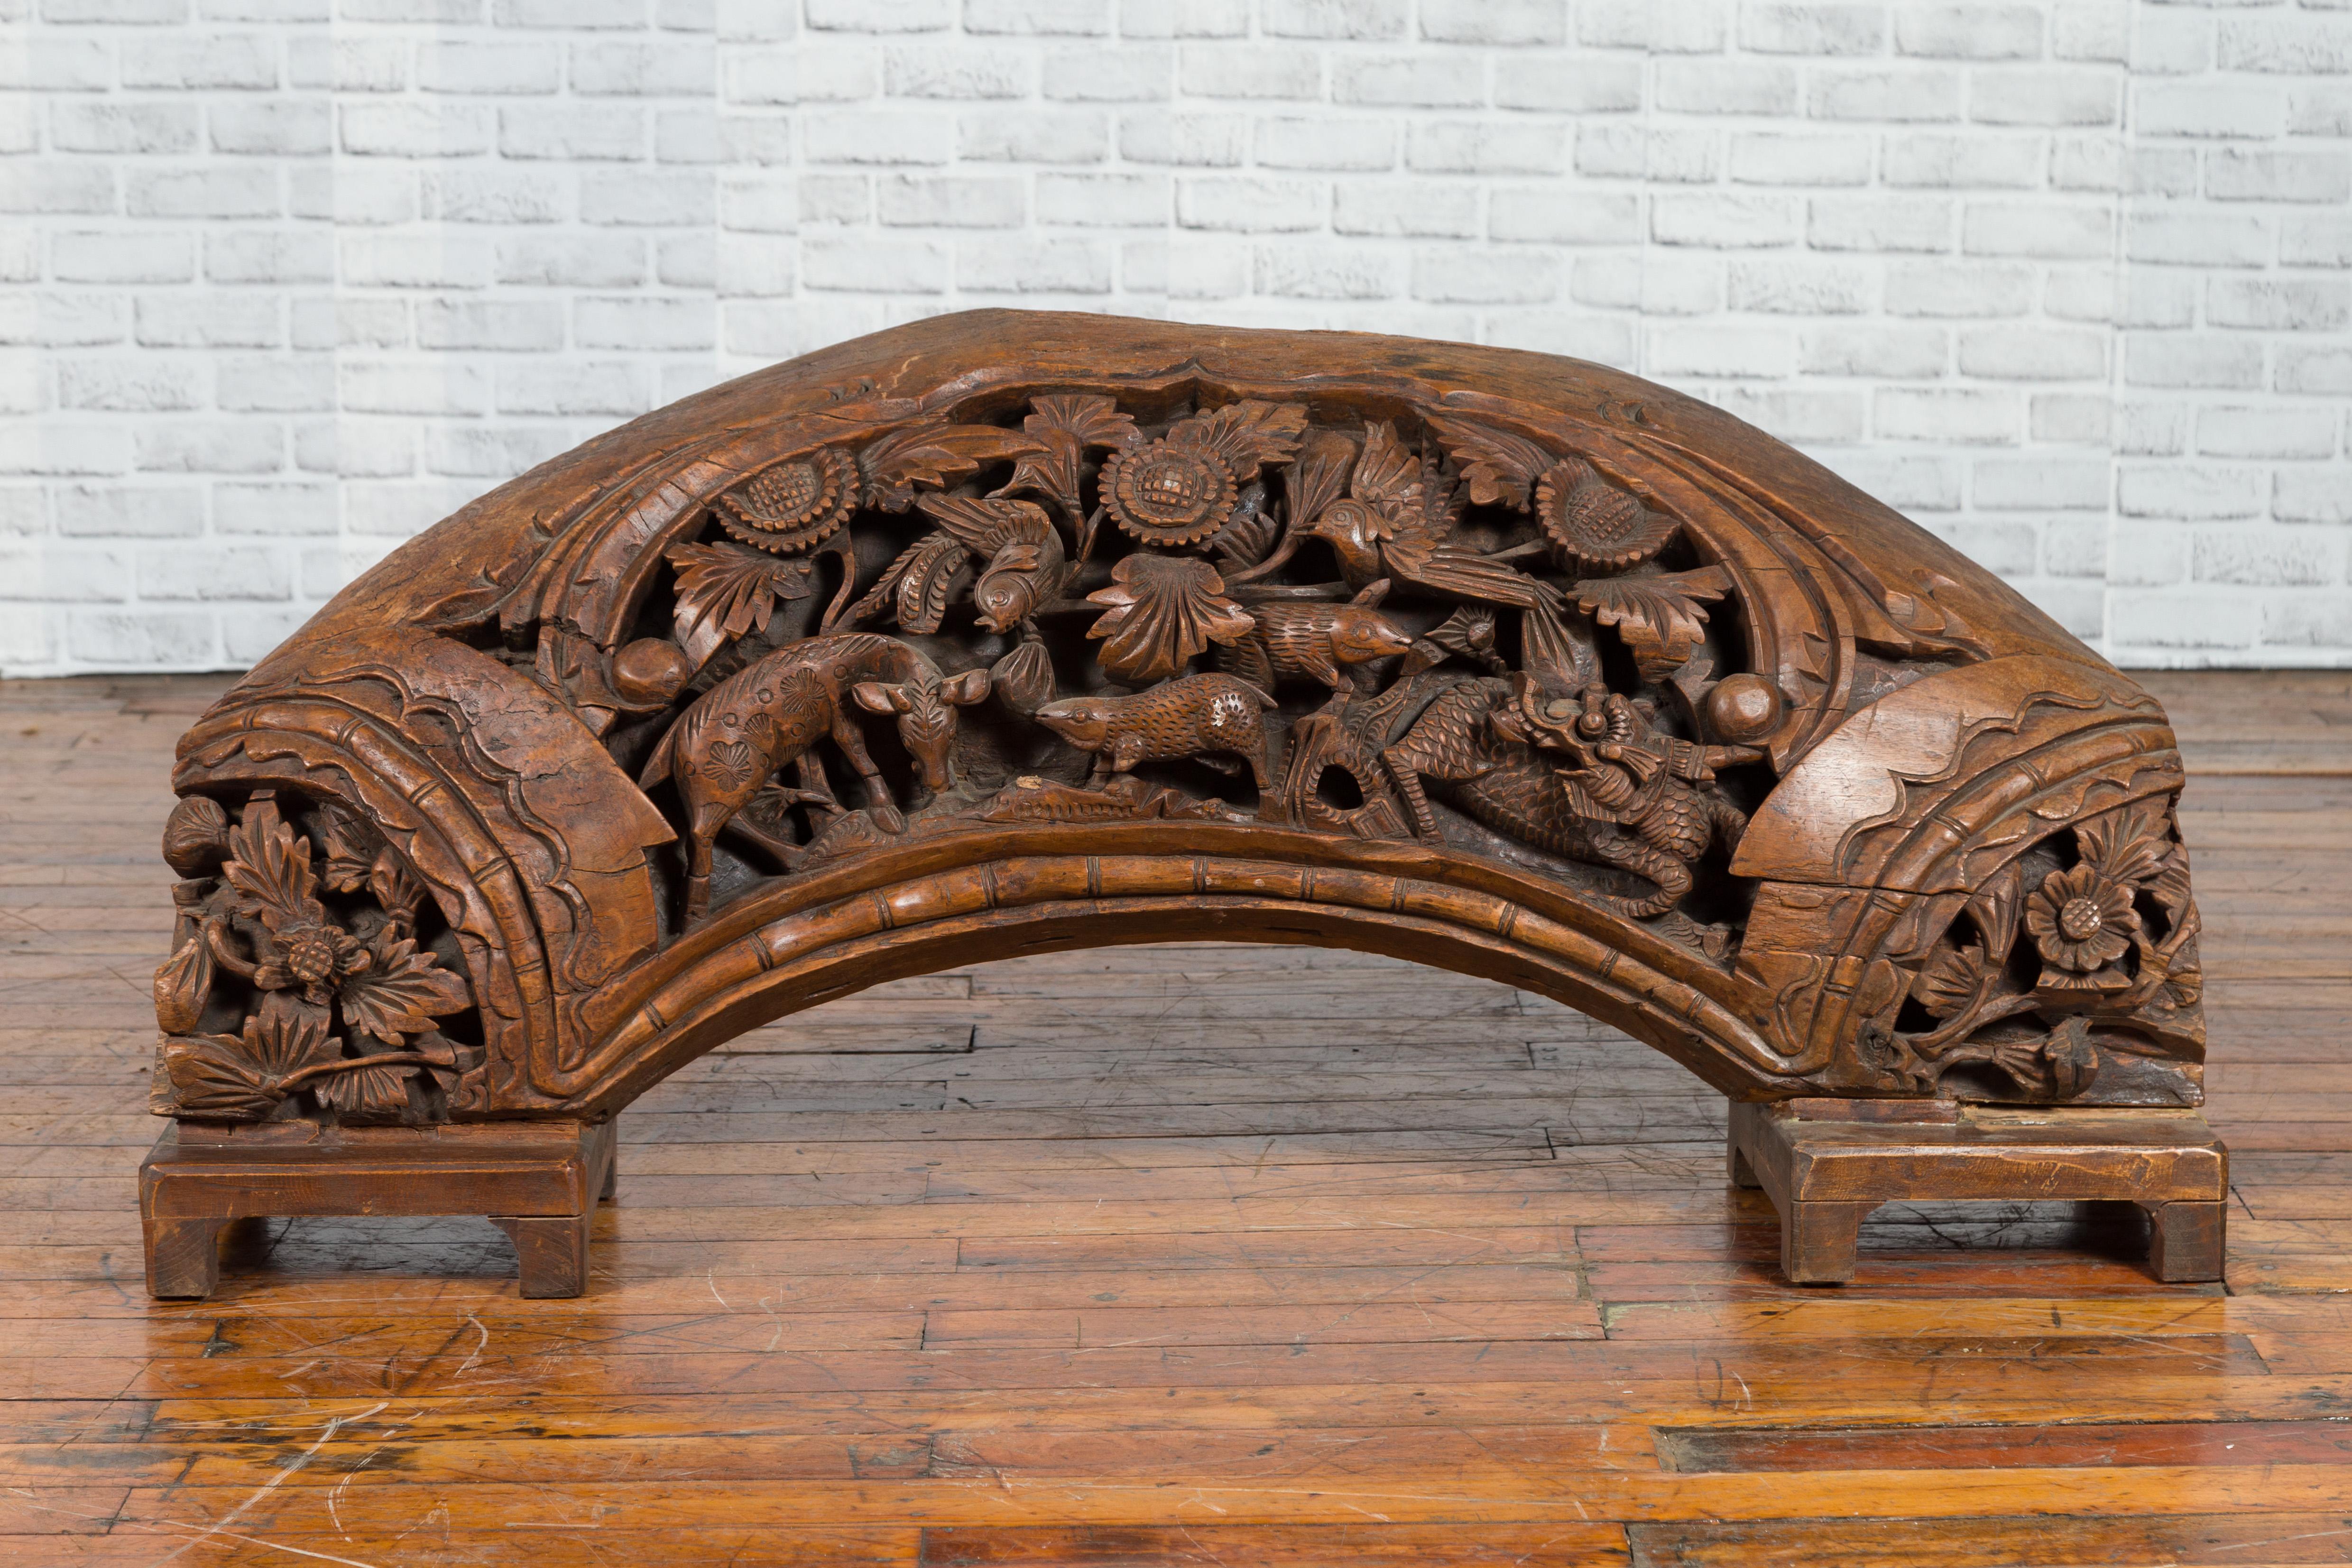 A Chinese vintage hand carved wooden floral and animal carving from the mid-20th century, with arched silhouette. Handcrafted in China and mounted on a custom base, this wooden sculpture depicts various animals and flowers carved in high relief on